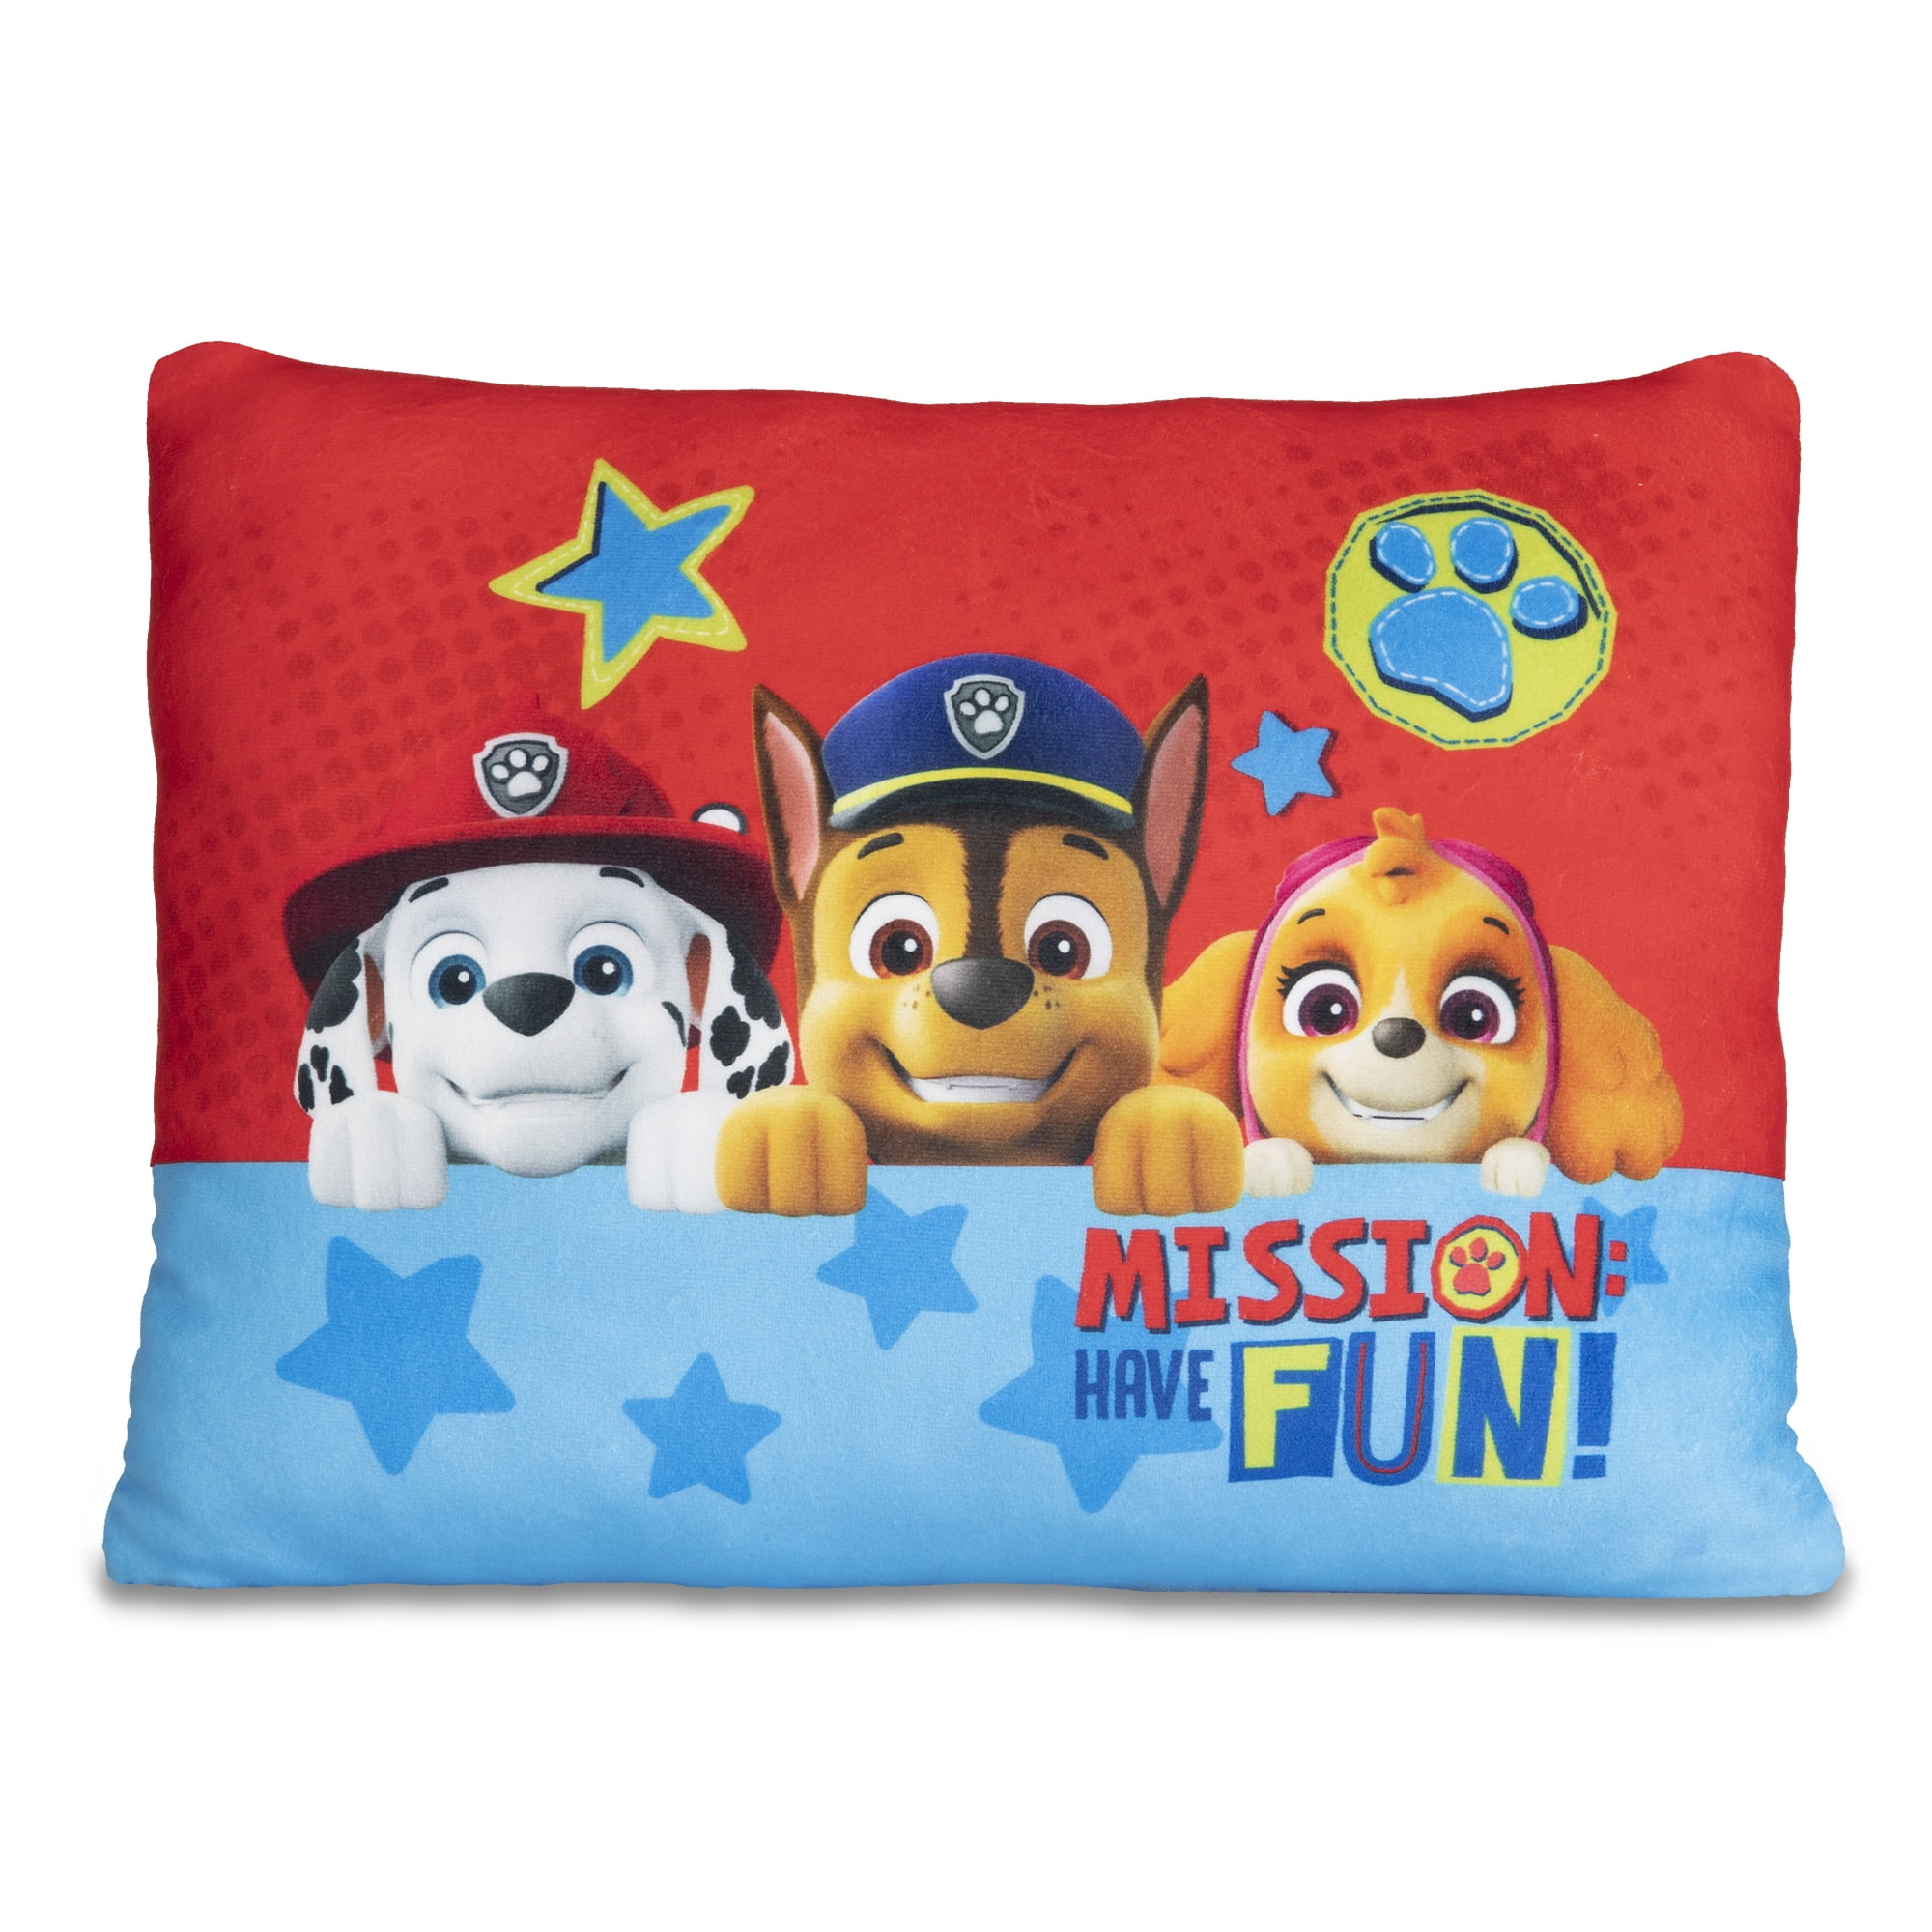 Paw Patrol "Mission Fun" Squishy Toddler Pillow, Red